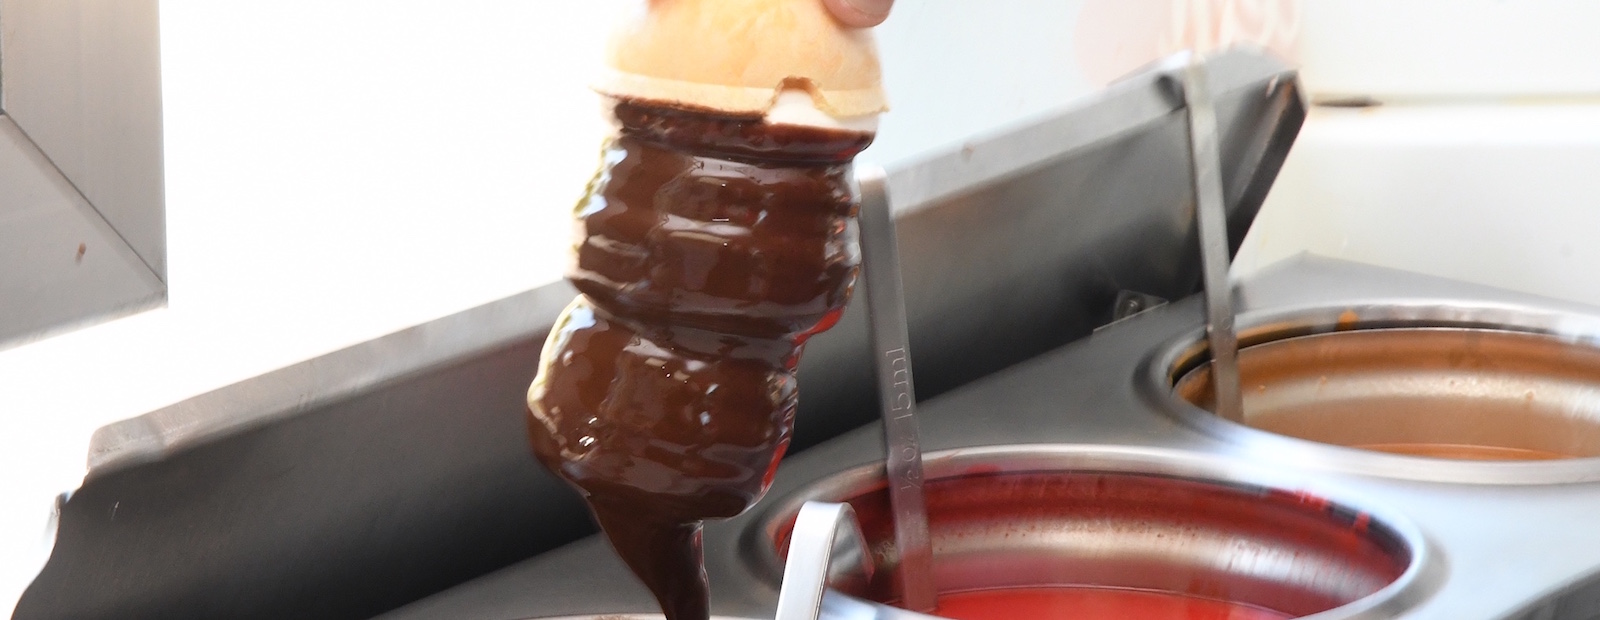 A cone dipped in chocolate